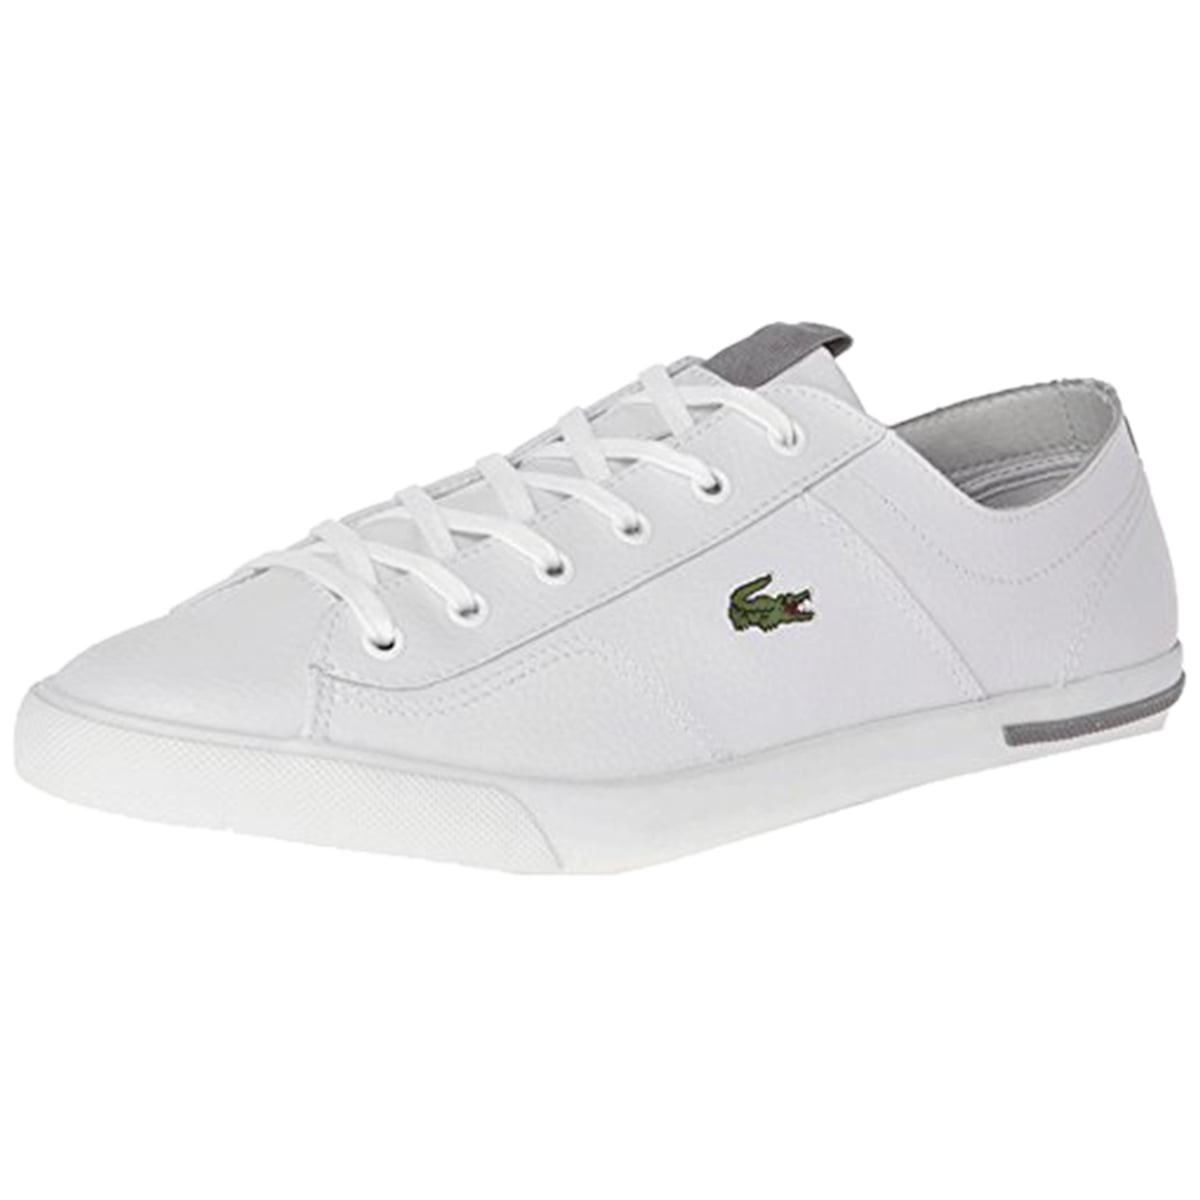 Buy Lacoste Ramer Lcr Spm Mens Style : 7-27spm1076 Online at Lowest ...